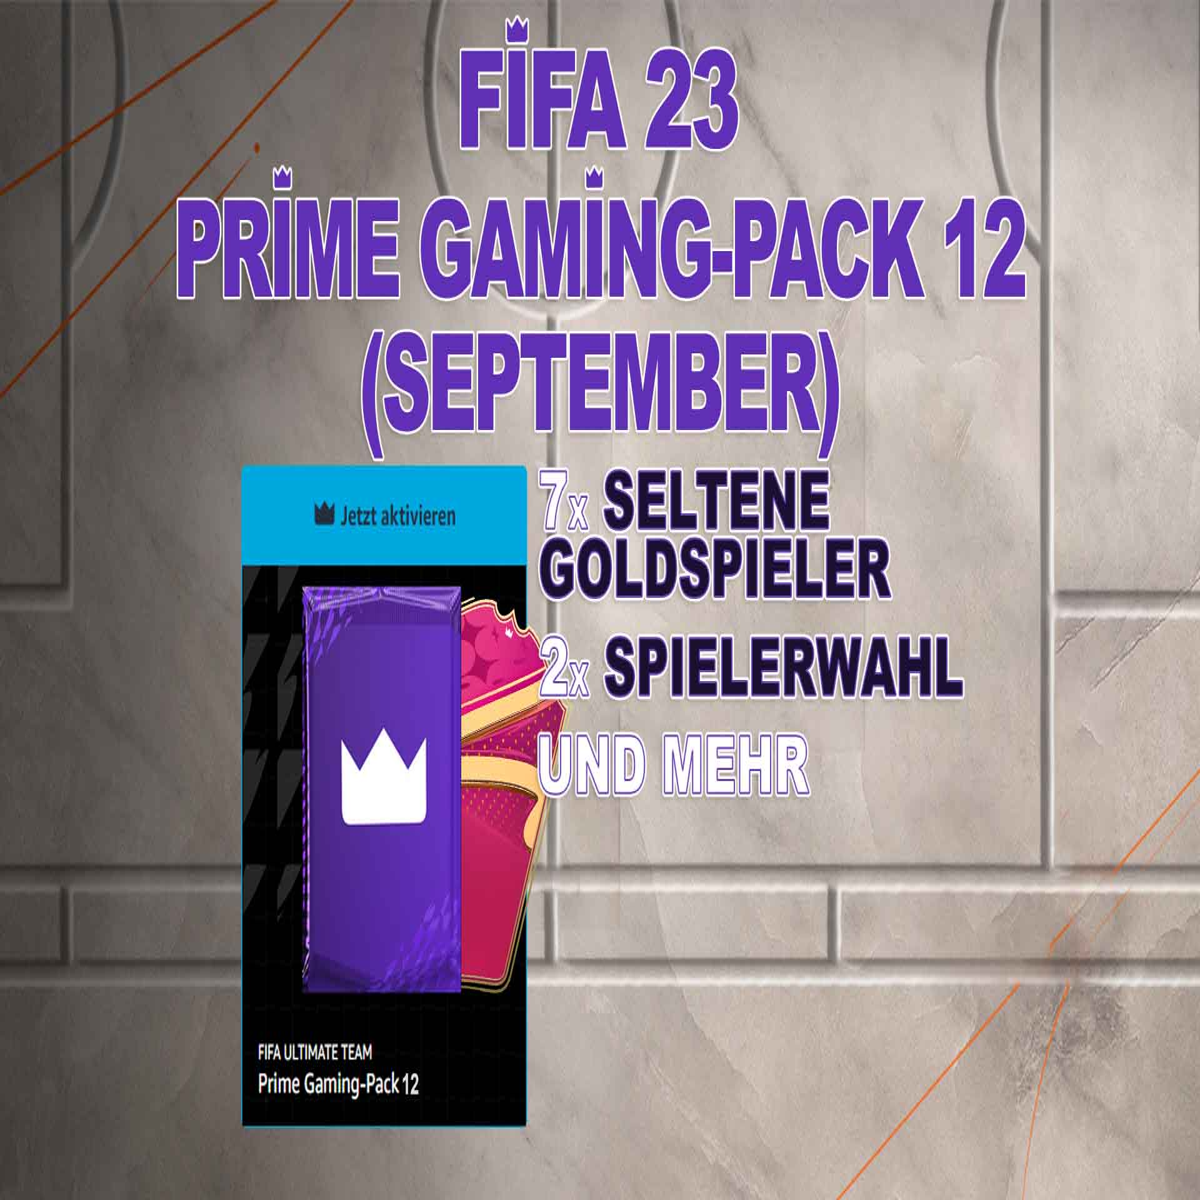 FIFA 23 - How to unlock Prime Gaming Pack #5 for FREE in Ultimate